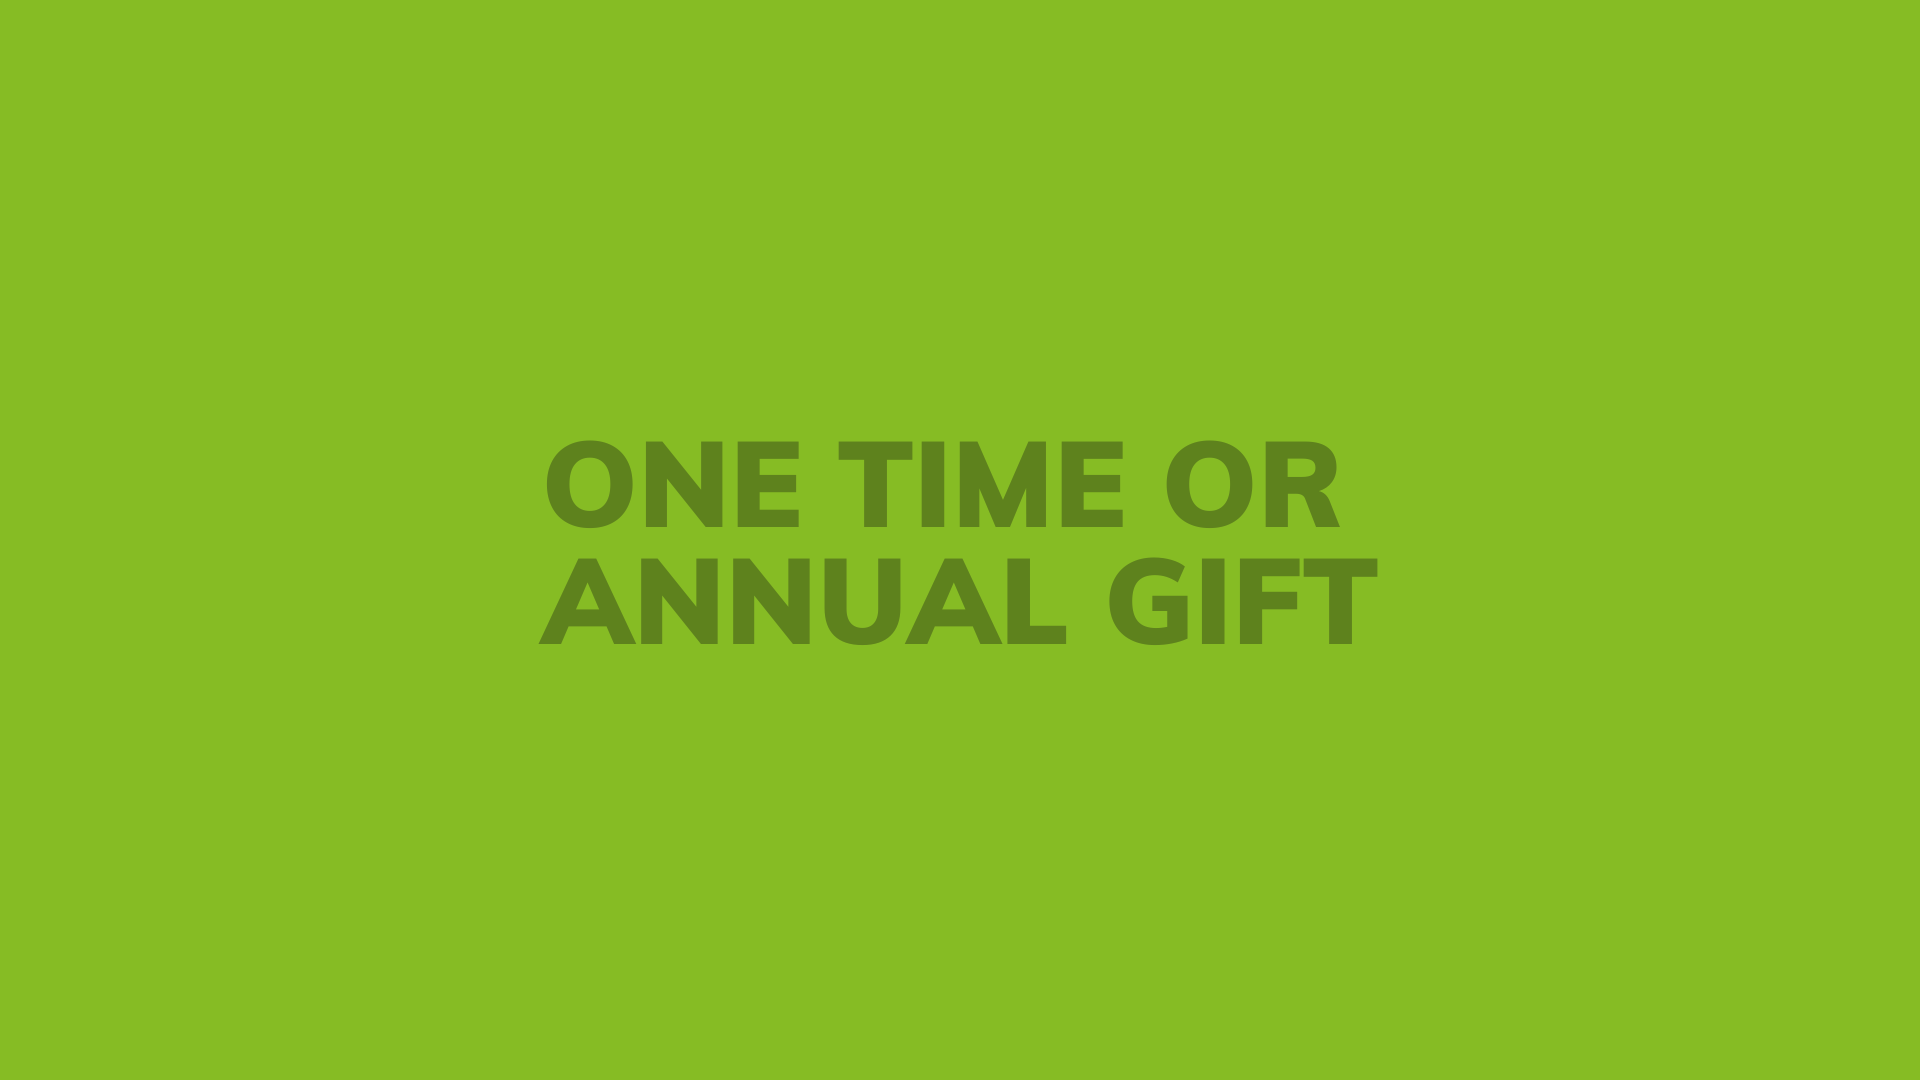 ONE TIME OR ANNUAL GIFT